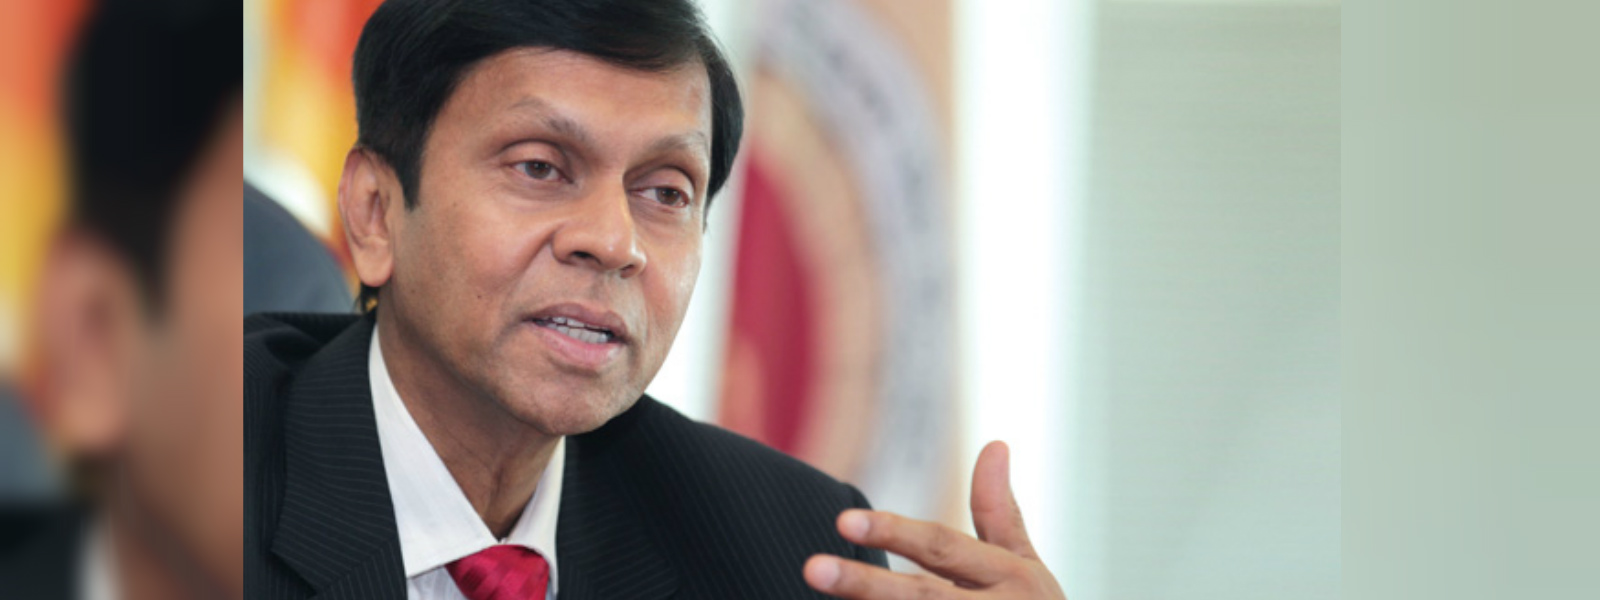 Sri Lanka is NOT meeting IMF for debt restructures